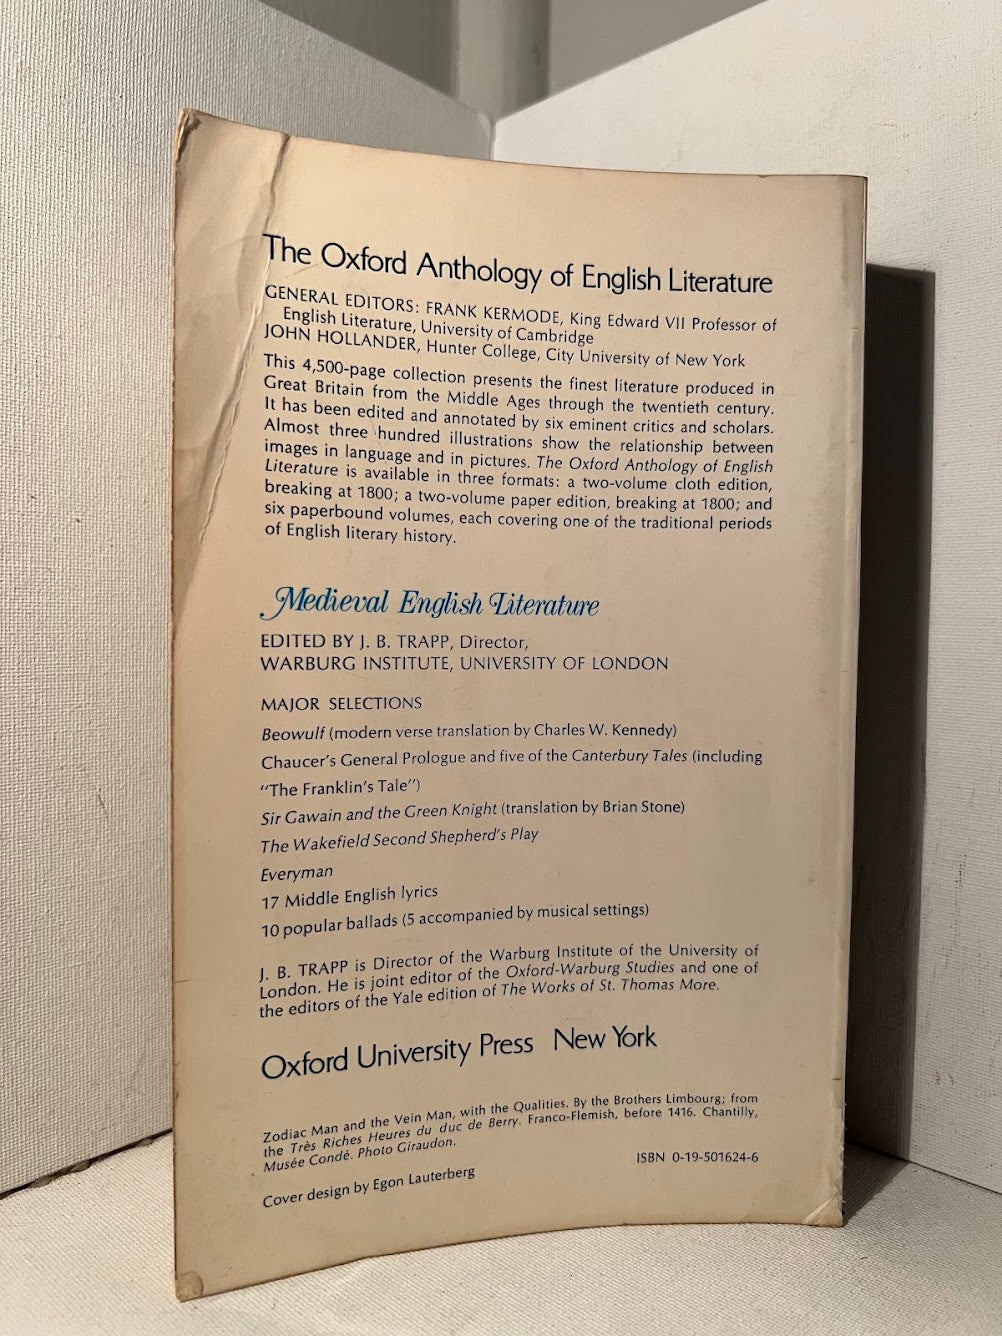 The Oxford Anthology of Medieval English Literature edited by J.B. Trapp